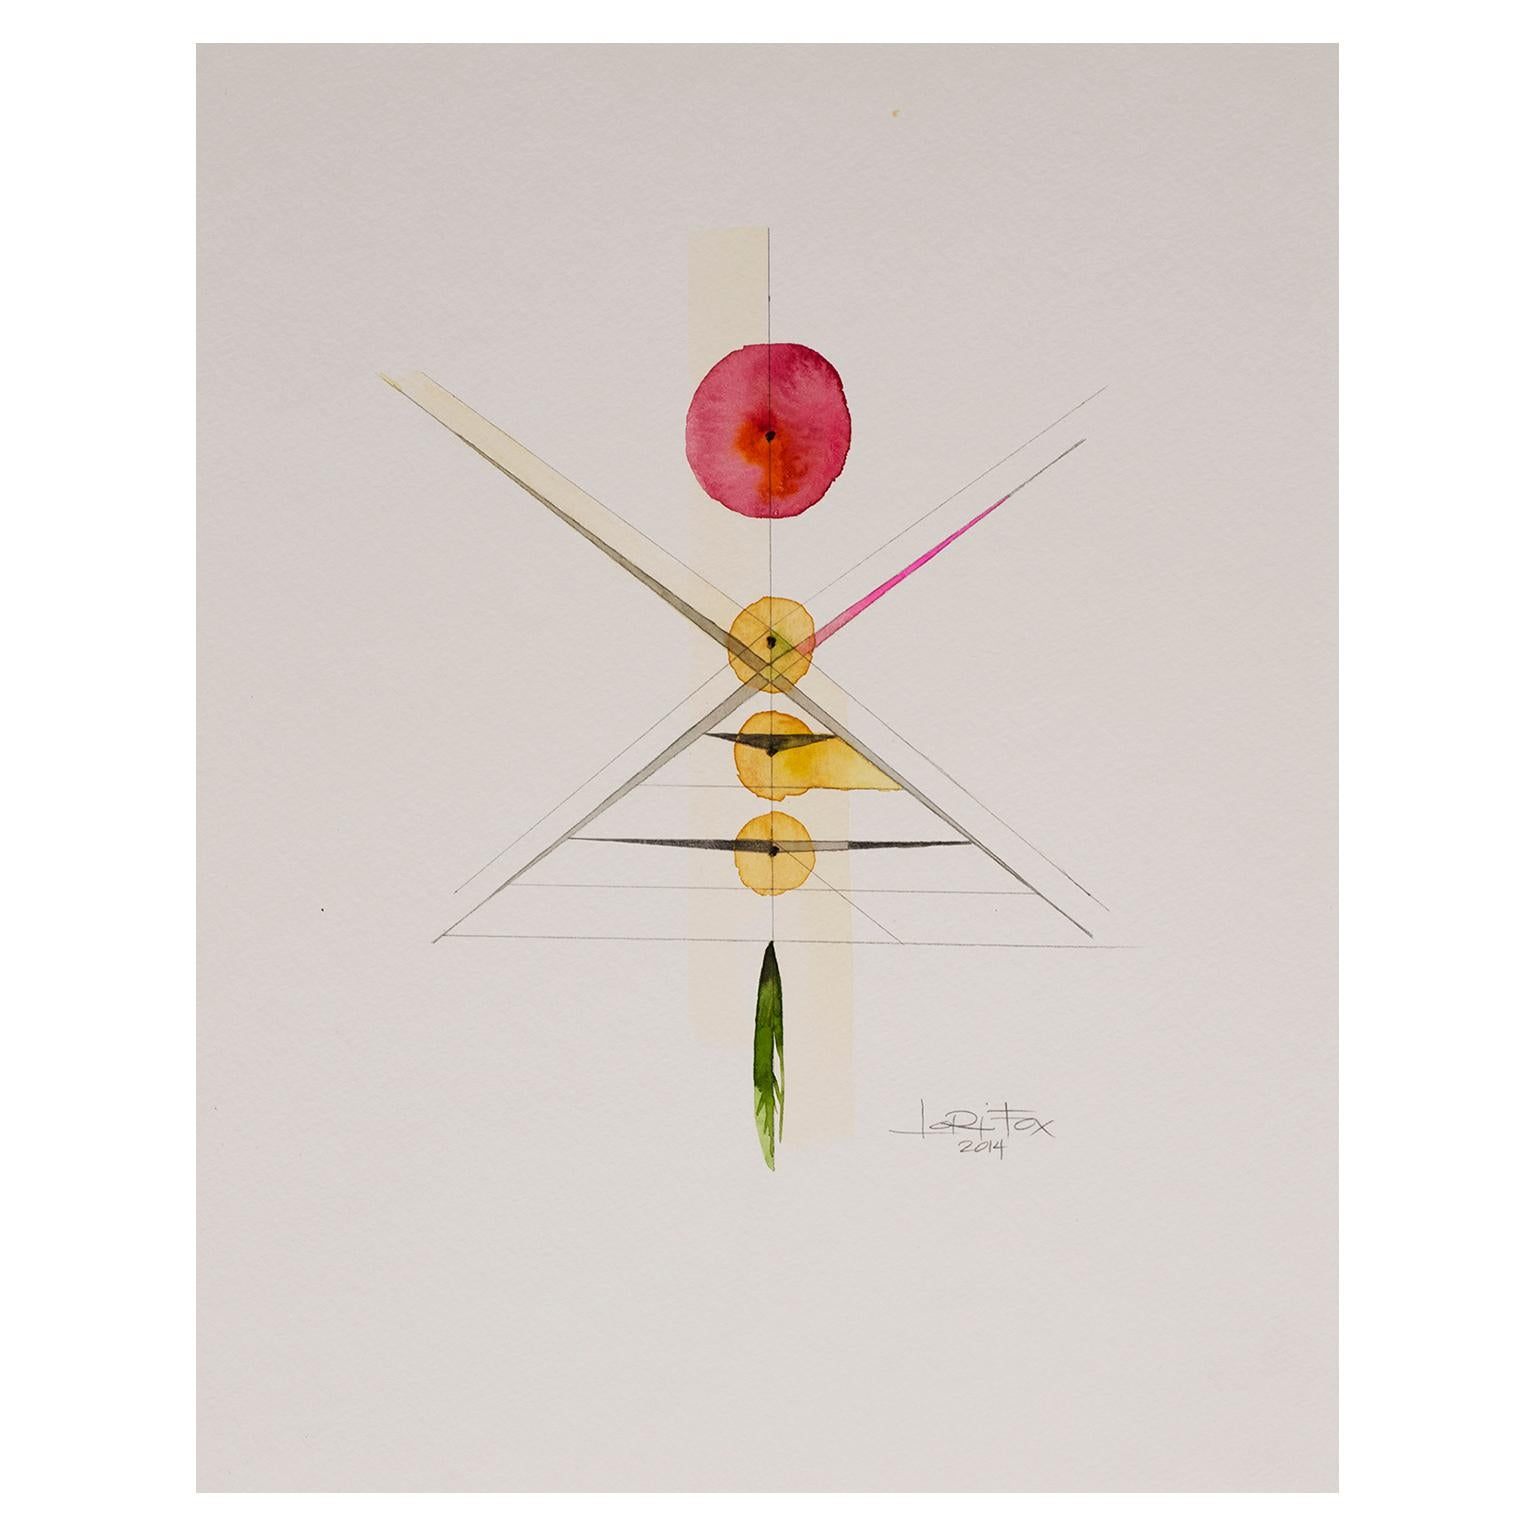 Totem 2.011 by Lori Fox. Abstract red, yellow and green watercolour on paper 1